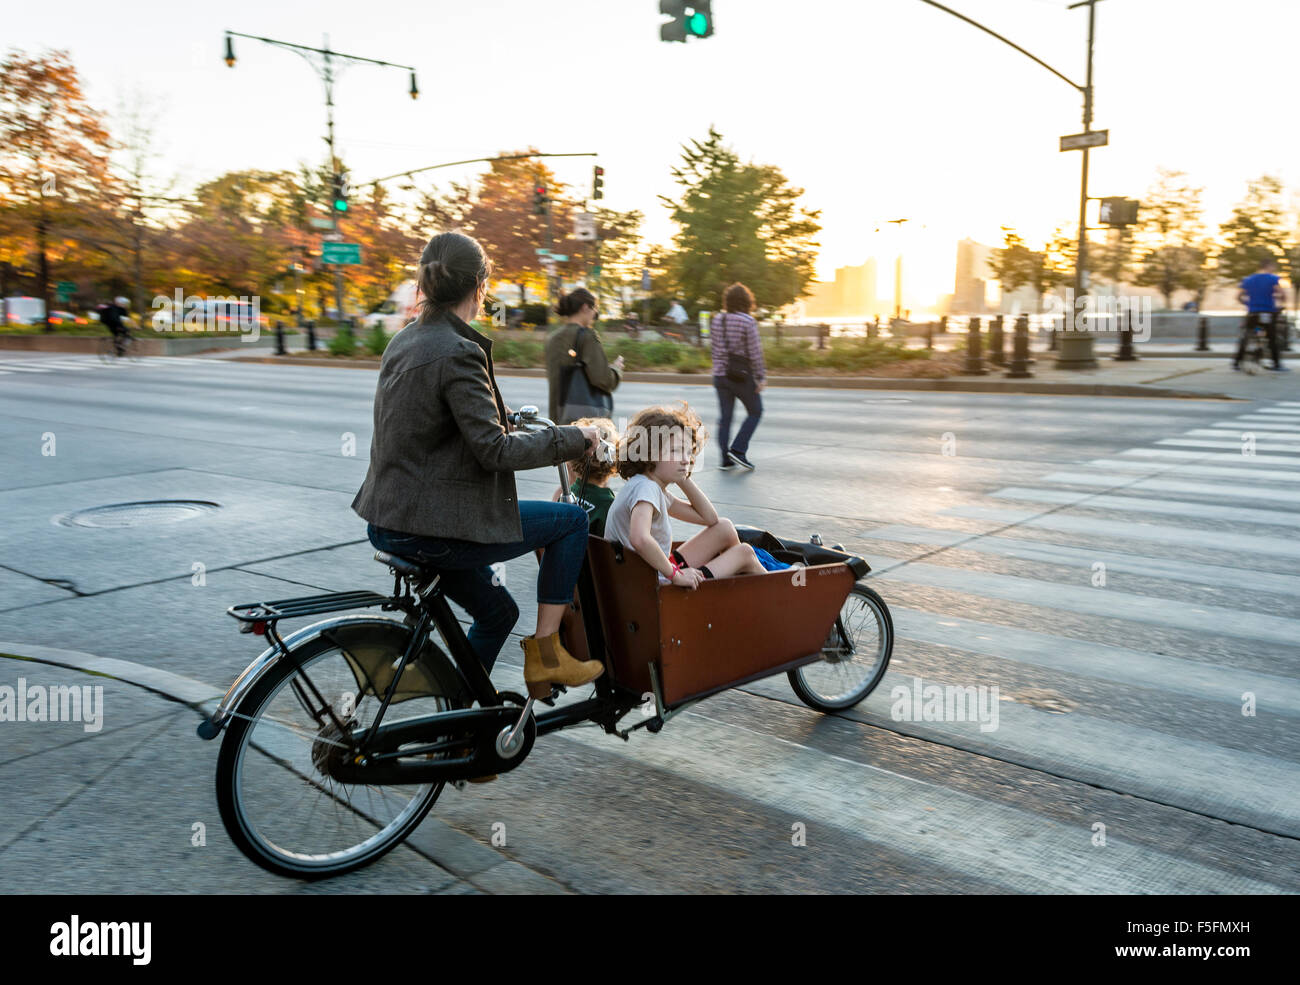 New York, NY A mother and two children riding a bakfiet (Dutch Cargo Bike )  cross the West Side Highway into Hudson River Park Stacy Walsh Rosenstock/Alamy Stock Photo